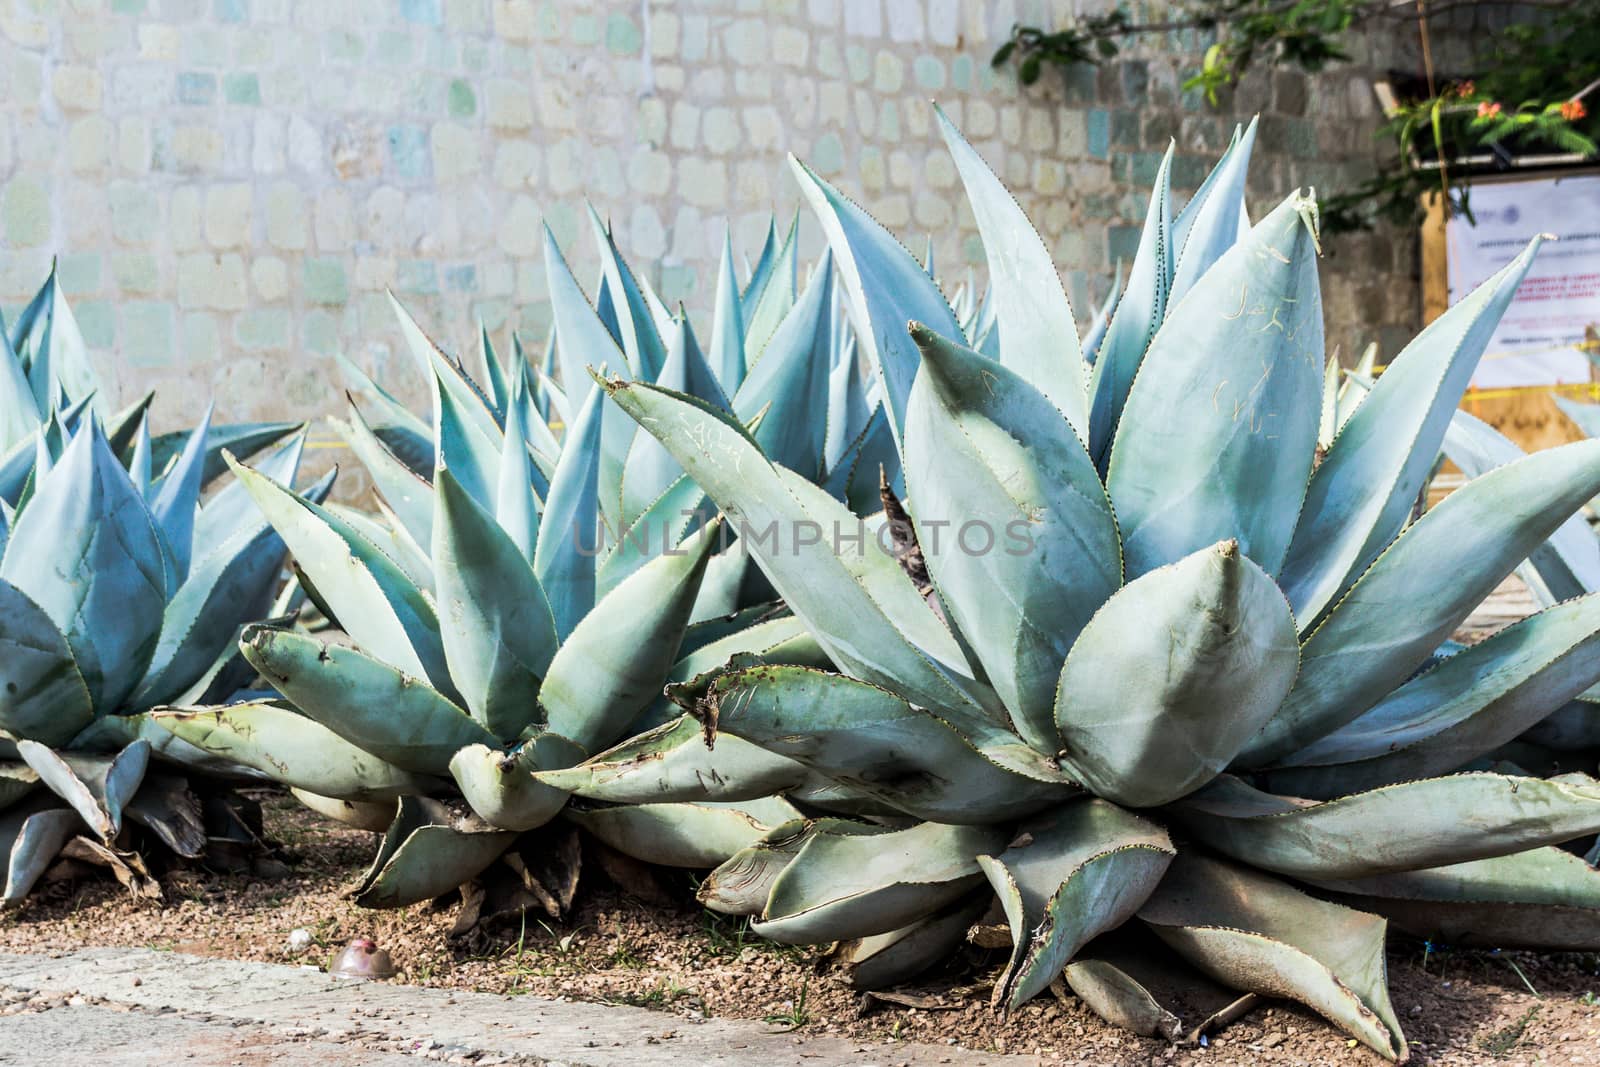 Photograph of some Green maguey traditional nativr mexican plants